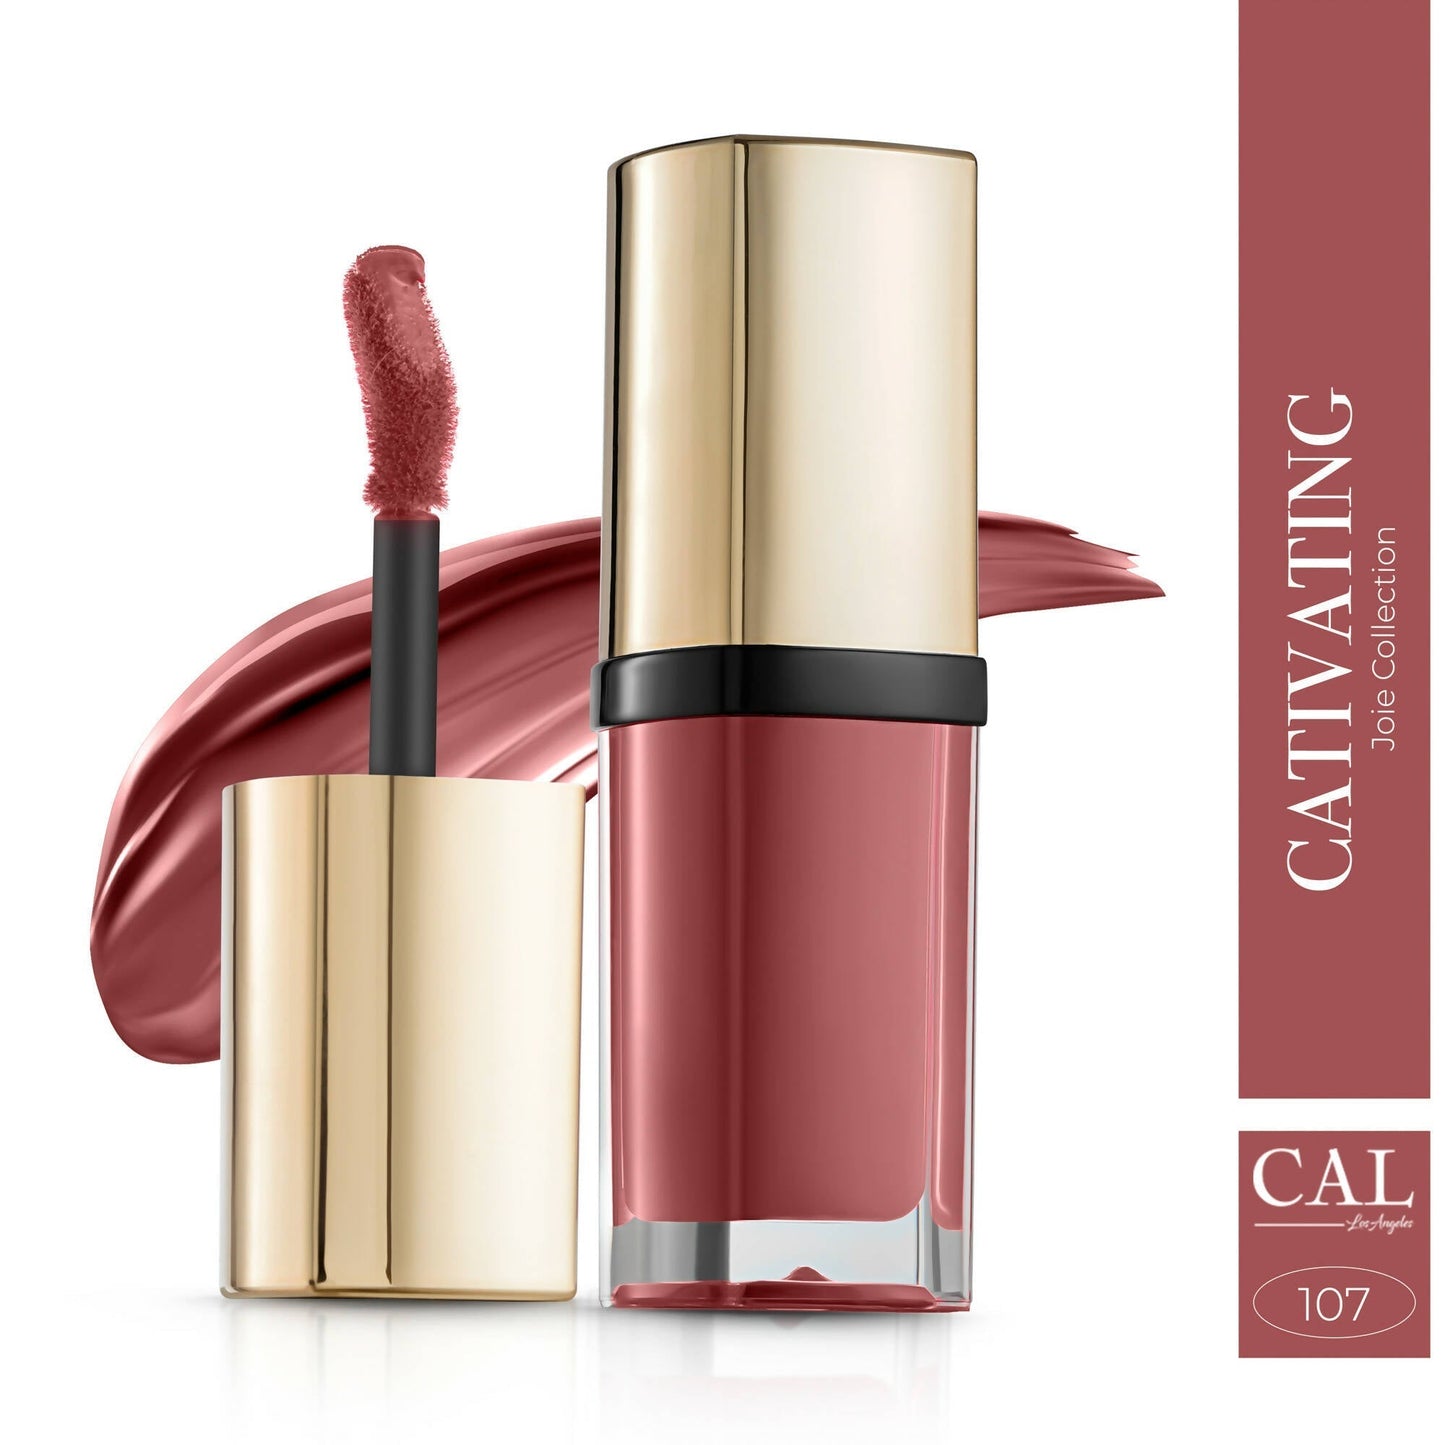 CAL Los Angeles Joie Collection Liquid Matte Pink Lipstick - Captivating 107